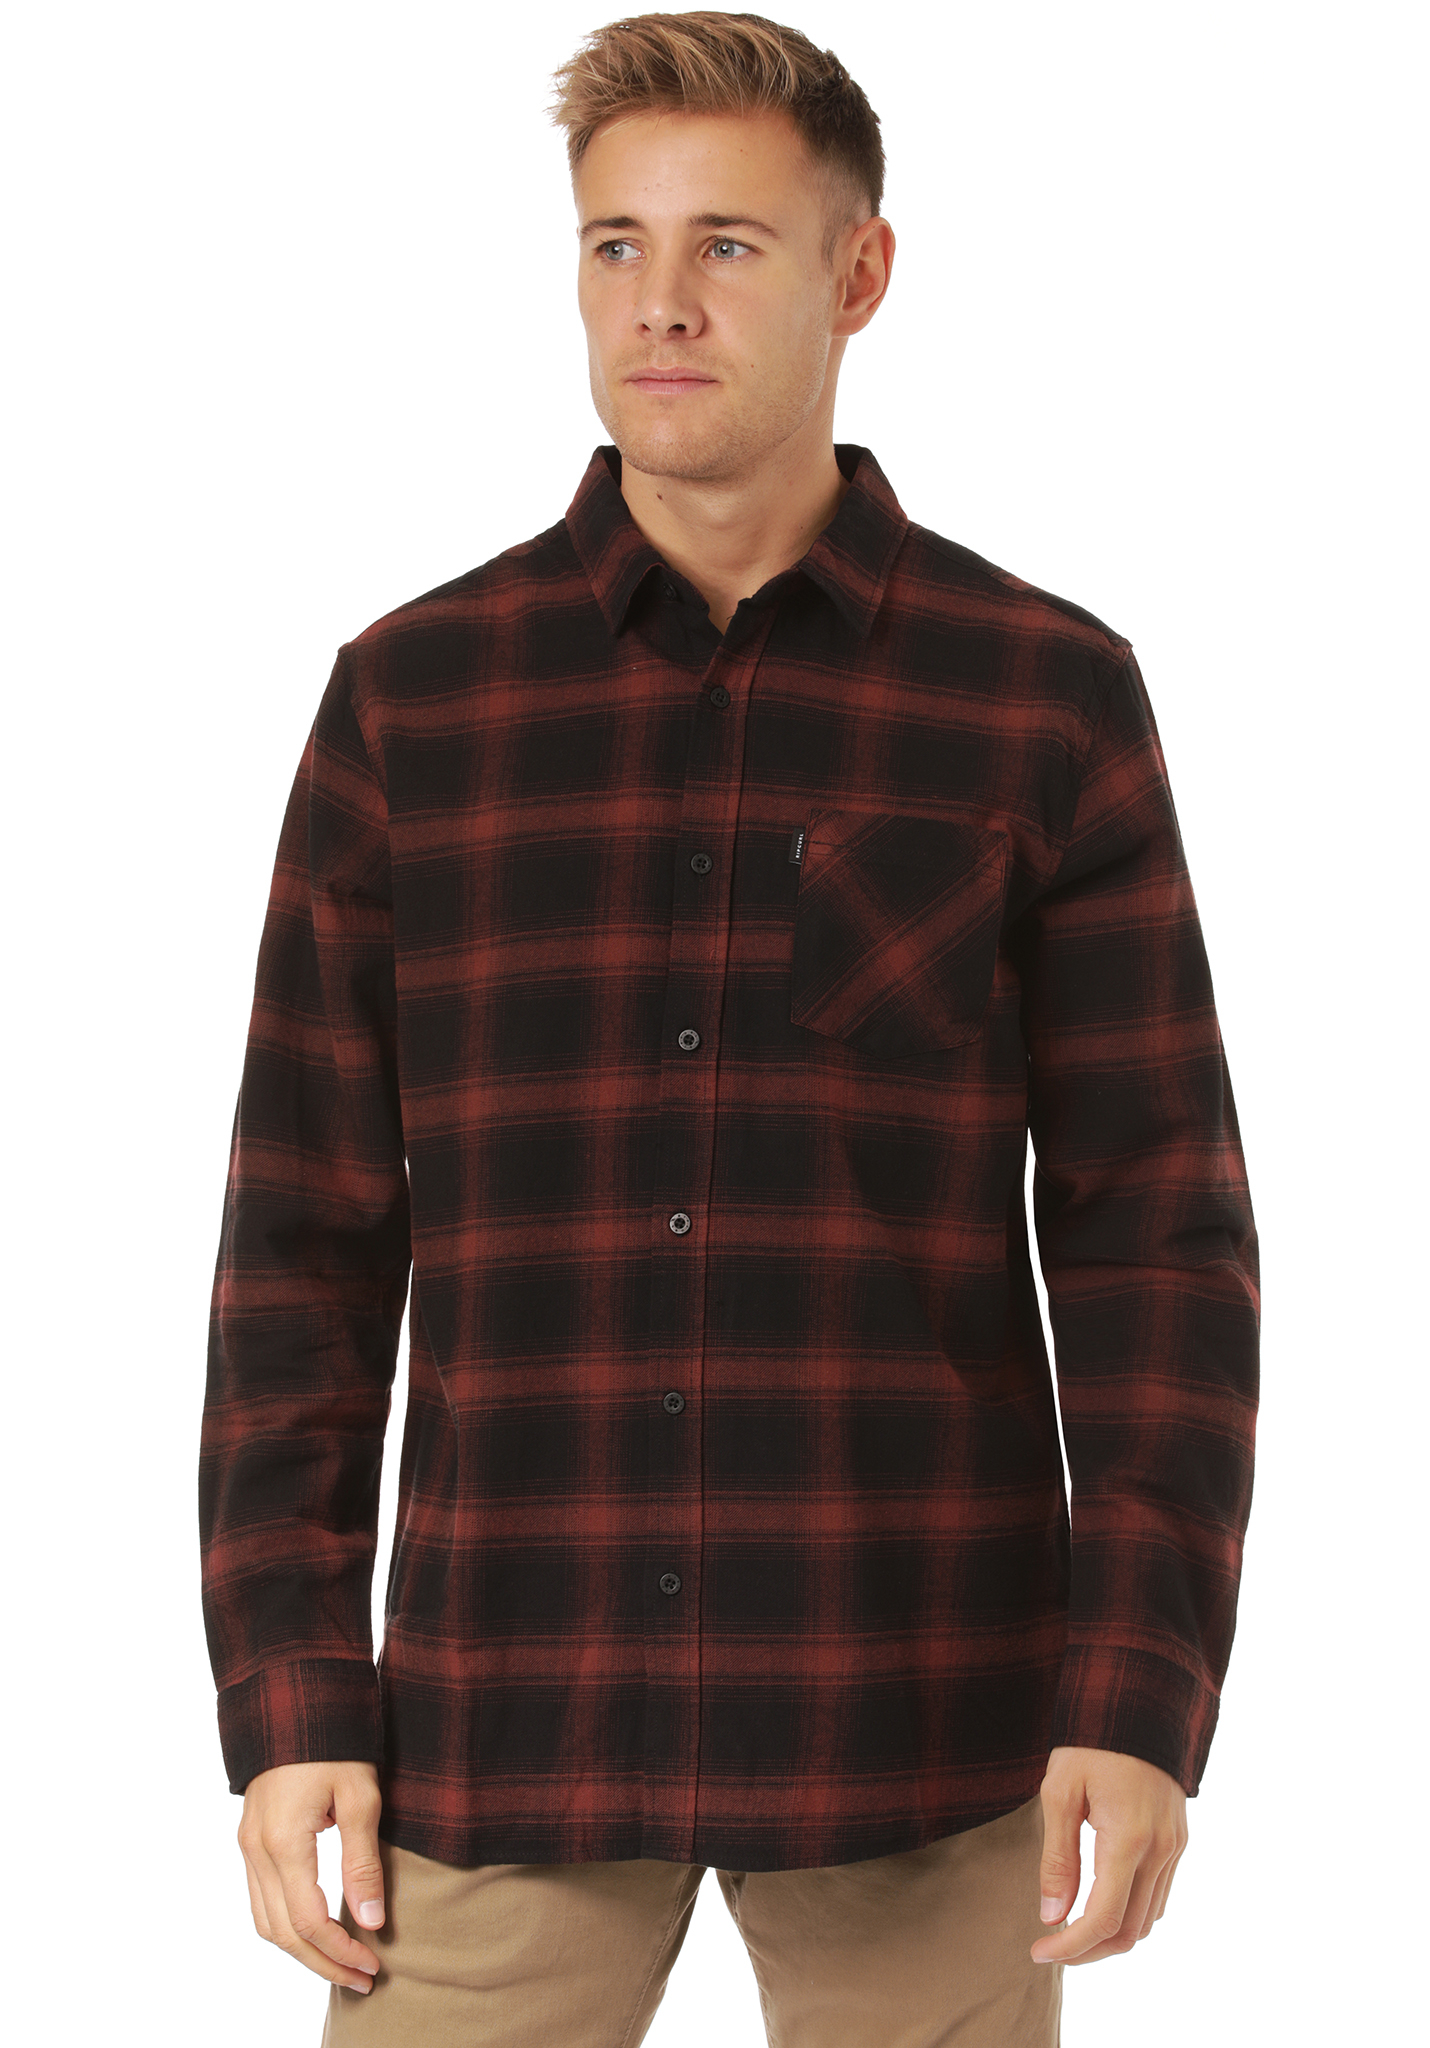 Rip Curl Check This Hemd maroon S